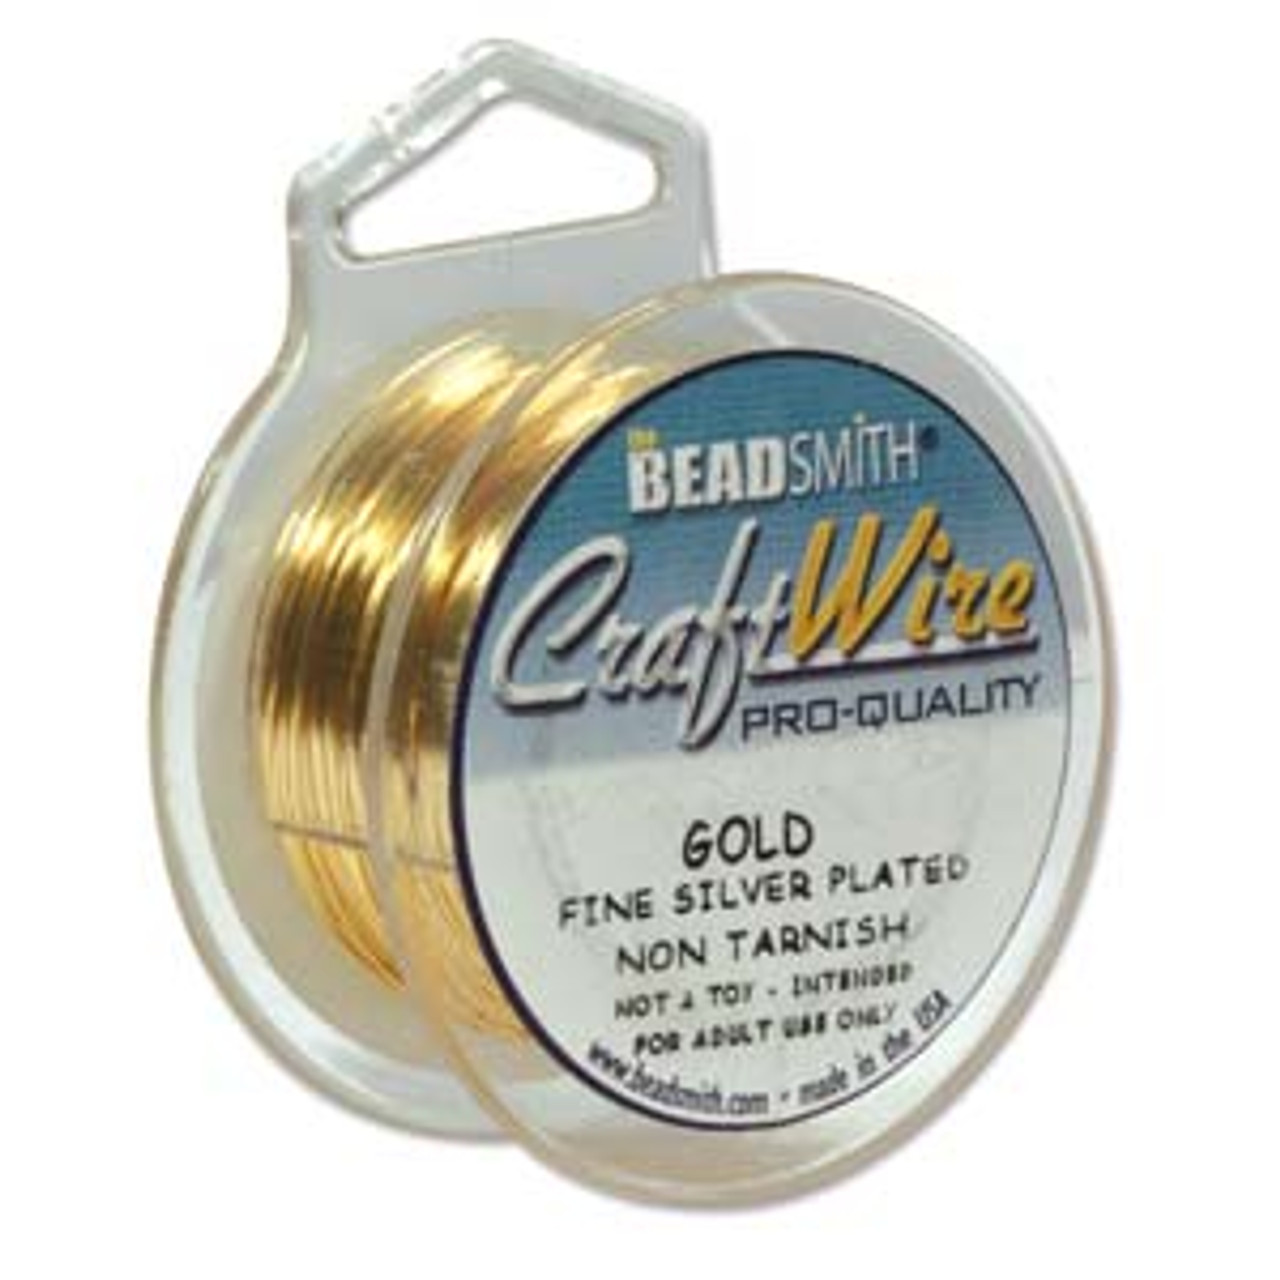 bead smith 22 gauge gold wire, wire elements, jewelry wire, gold wire, 22  gauge wire, wire